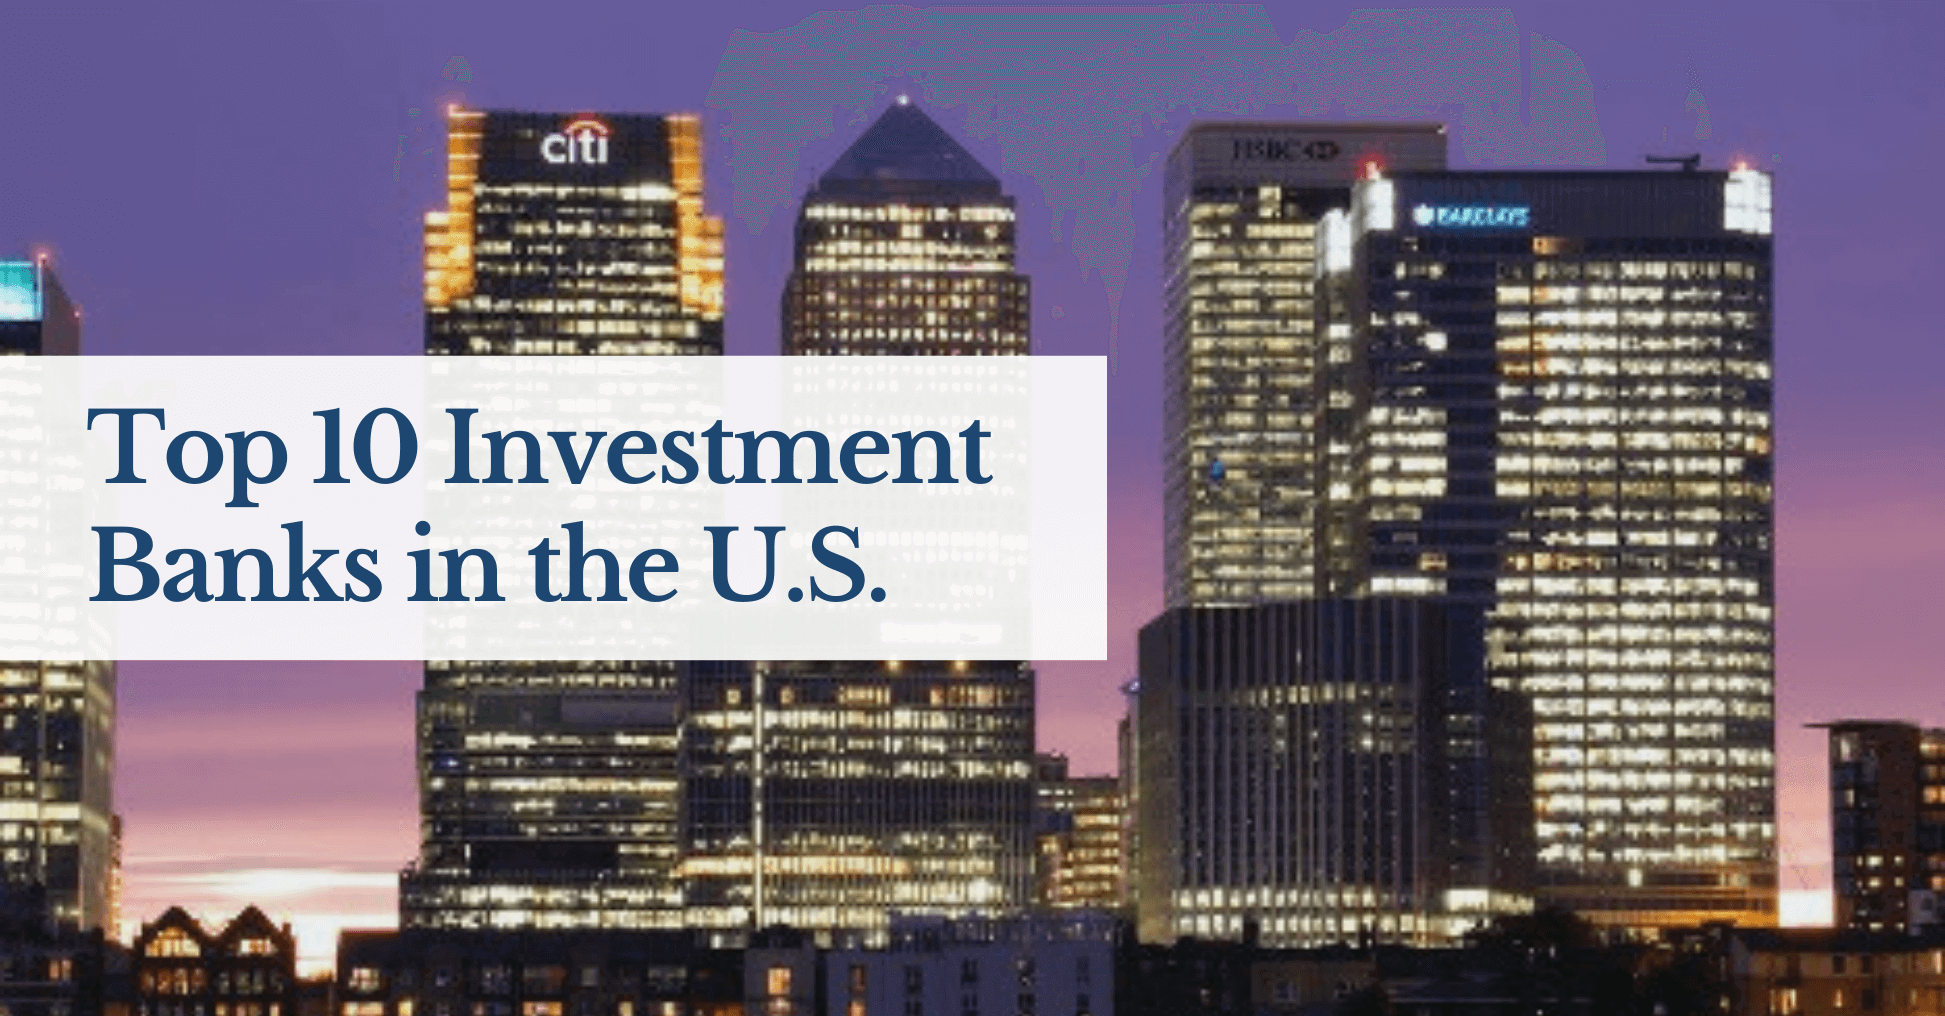 Top 10 Investment Banks in the U.S.